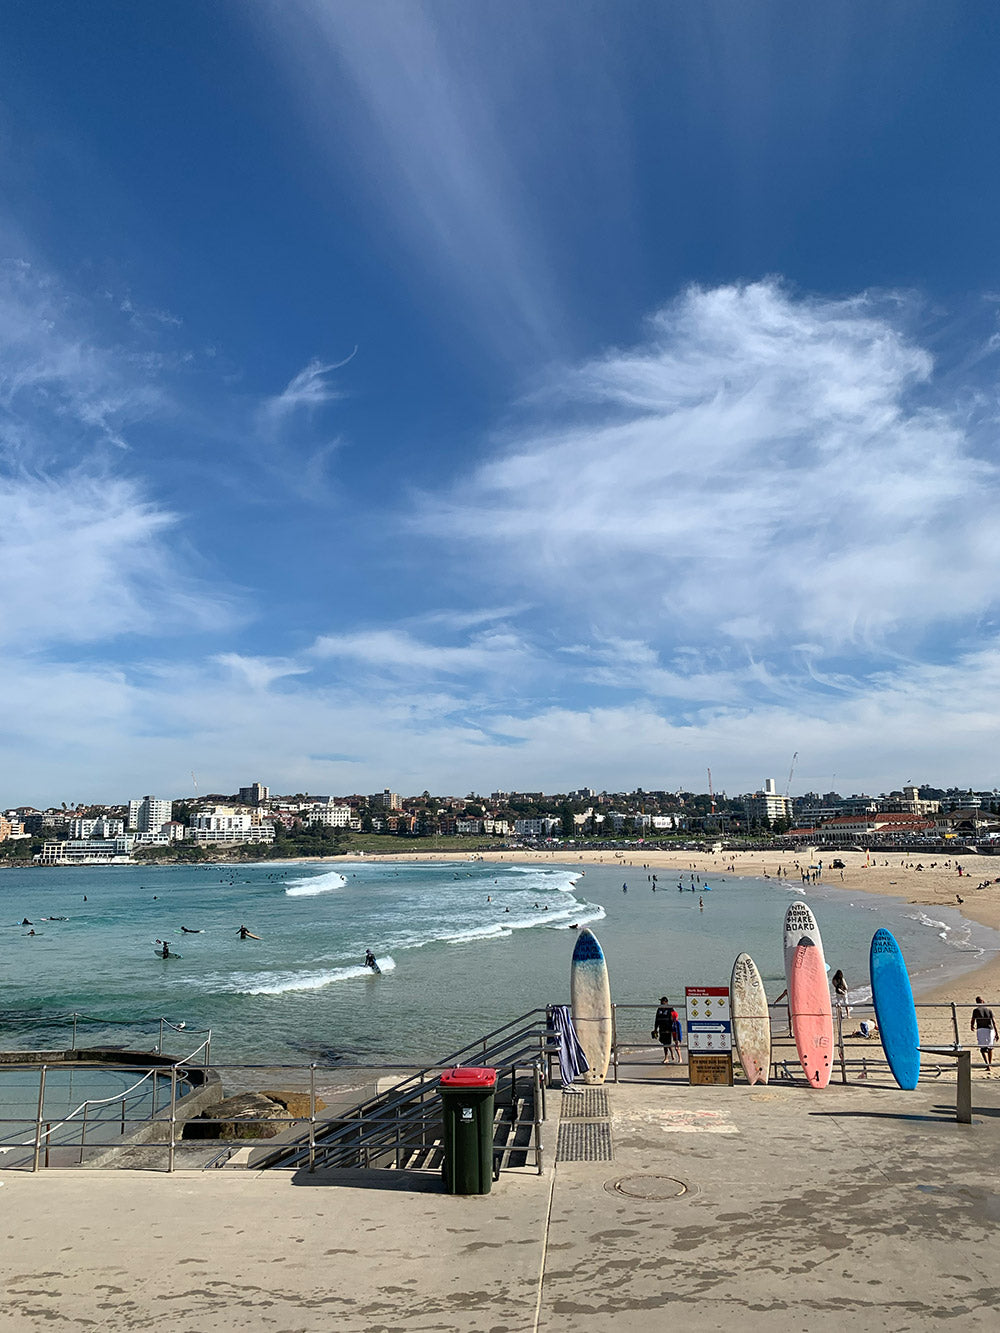 View over Bondi beach, Sydney, Australia. 4 surfboards leaning against the rail of the steps down to the beach with Bondi Bay background behind. The sky is blue with some clouds.